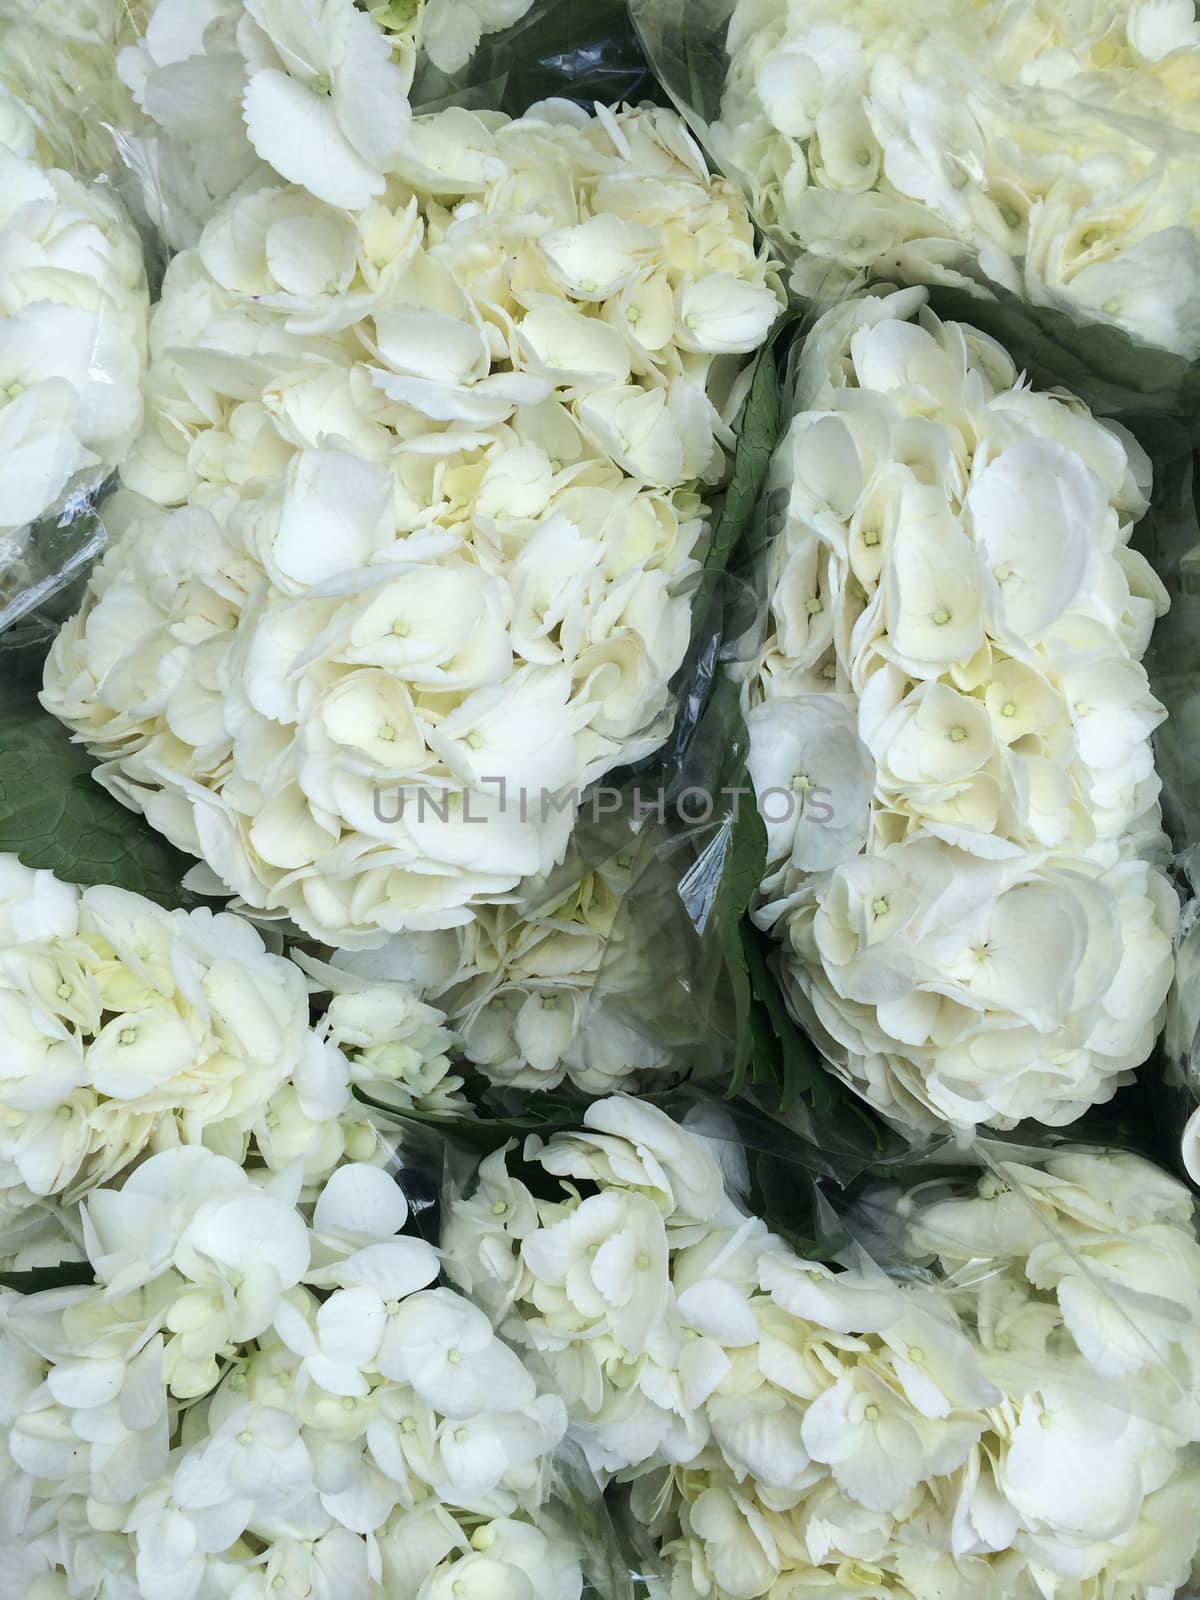 Plastic wrapped bouquets of white hydrangeas